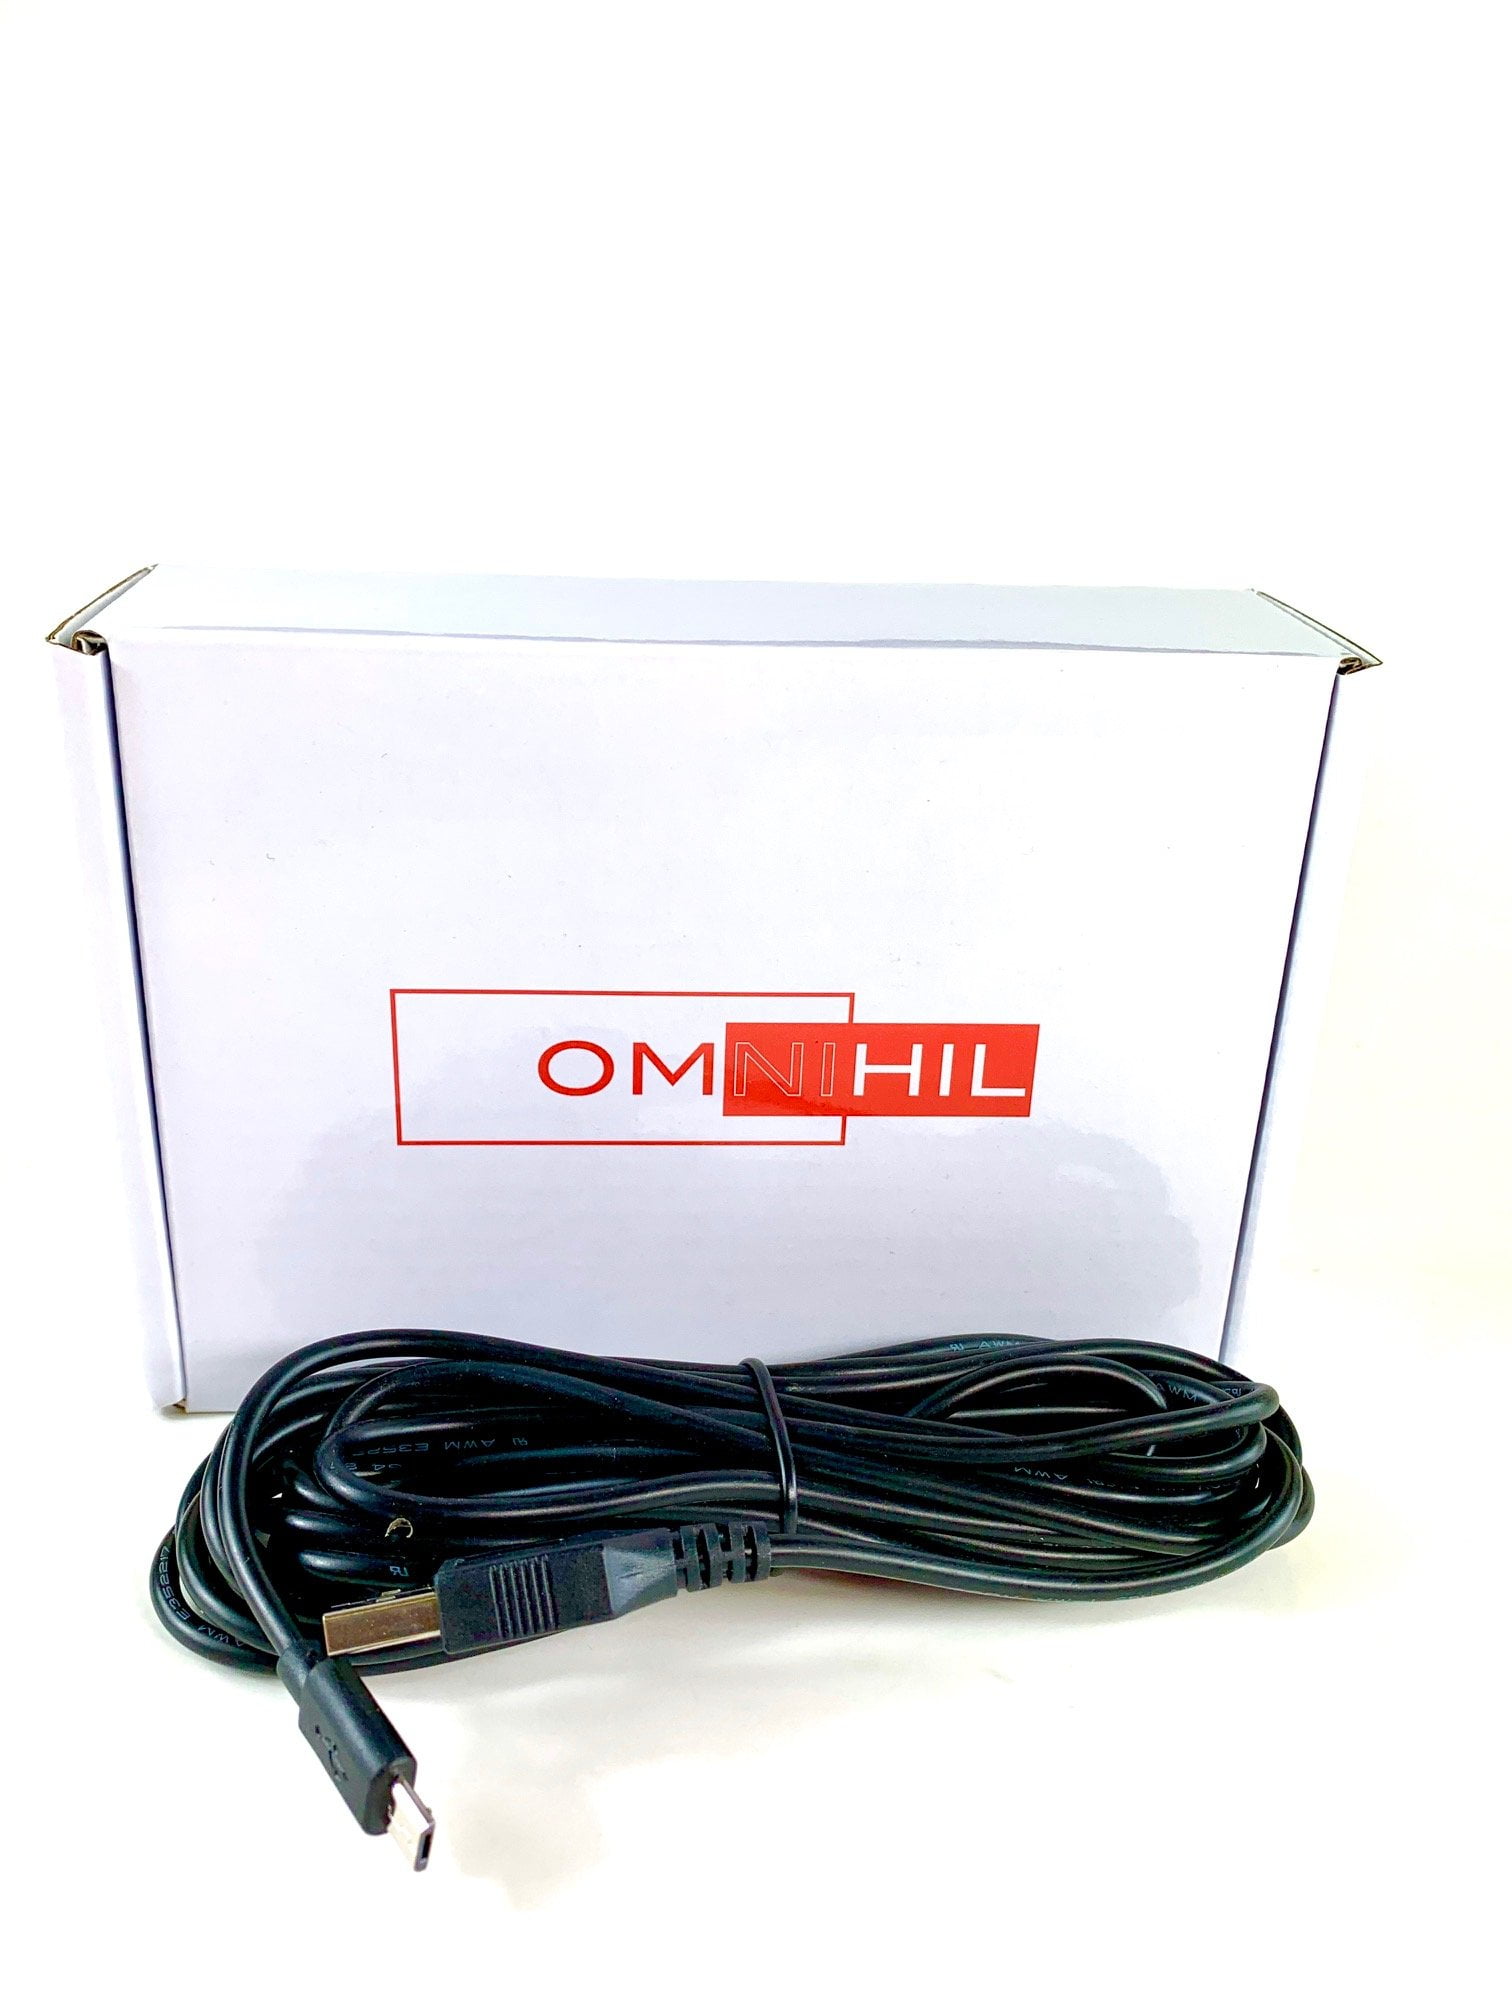 OMNIHIL 15 Feet Long High Speed USB 2.0 Cable Compatible with Bosma X1 HD Night Vision Camera 